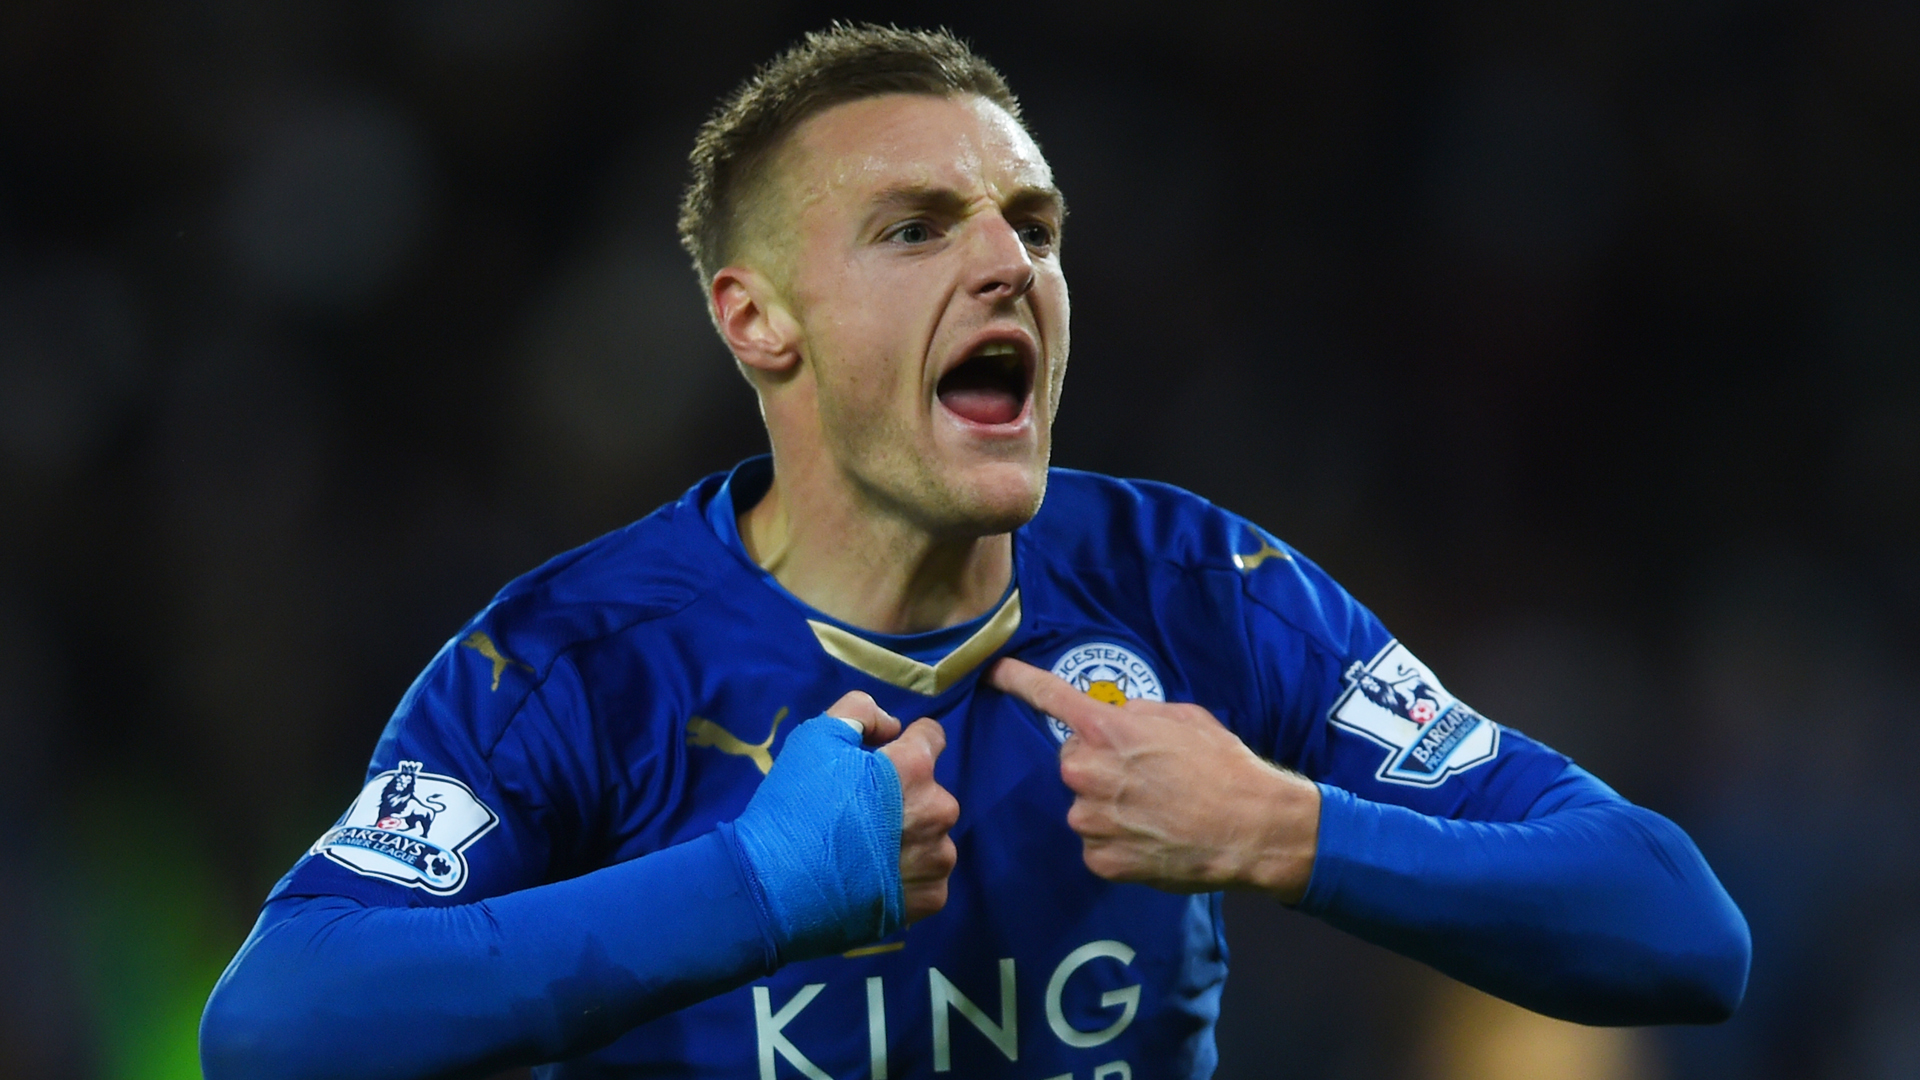 LEICESTER, ENGLAND - NOVEMBER 28: Jamie Vardy of Leicester City celebrates scoring his team's first goal during the Barclays Premier League match between Leicester City and Manchester United at The King Power Stadium on November 28, 2015 in Leicester, England. (Photo by Laurence Griffiths/Getty Images)